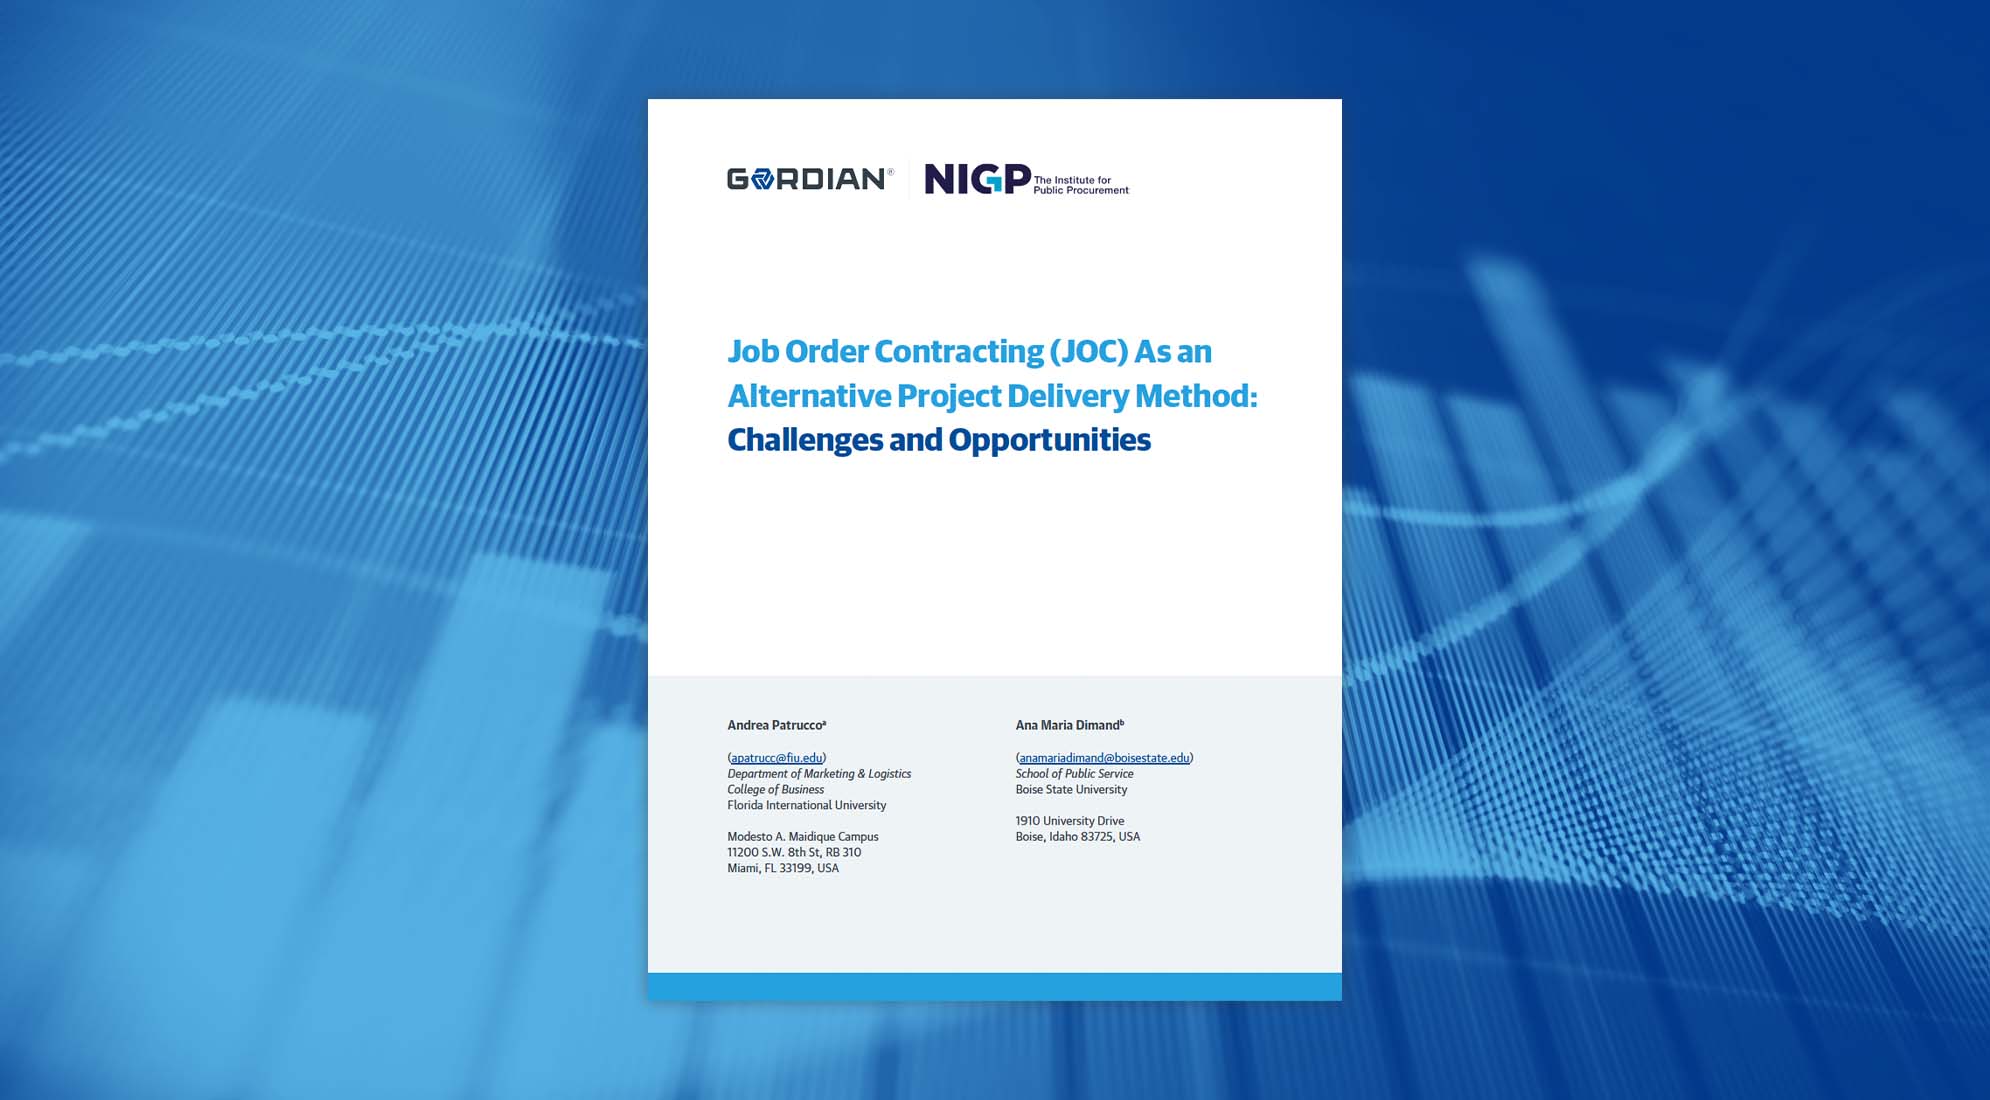 Job Order Contracting (JOC) as an Alternative Project Delivery Method: Challenges and Opportunities 3